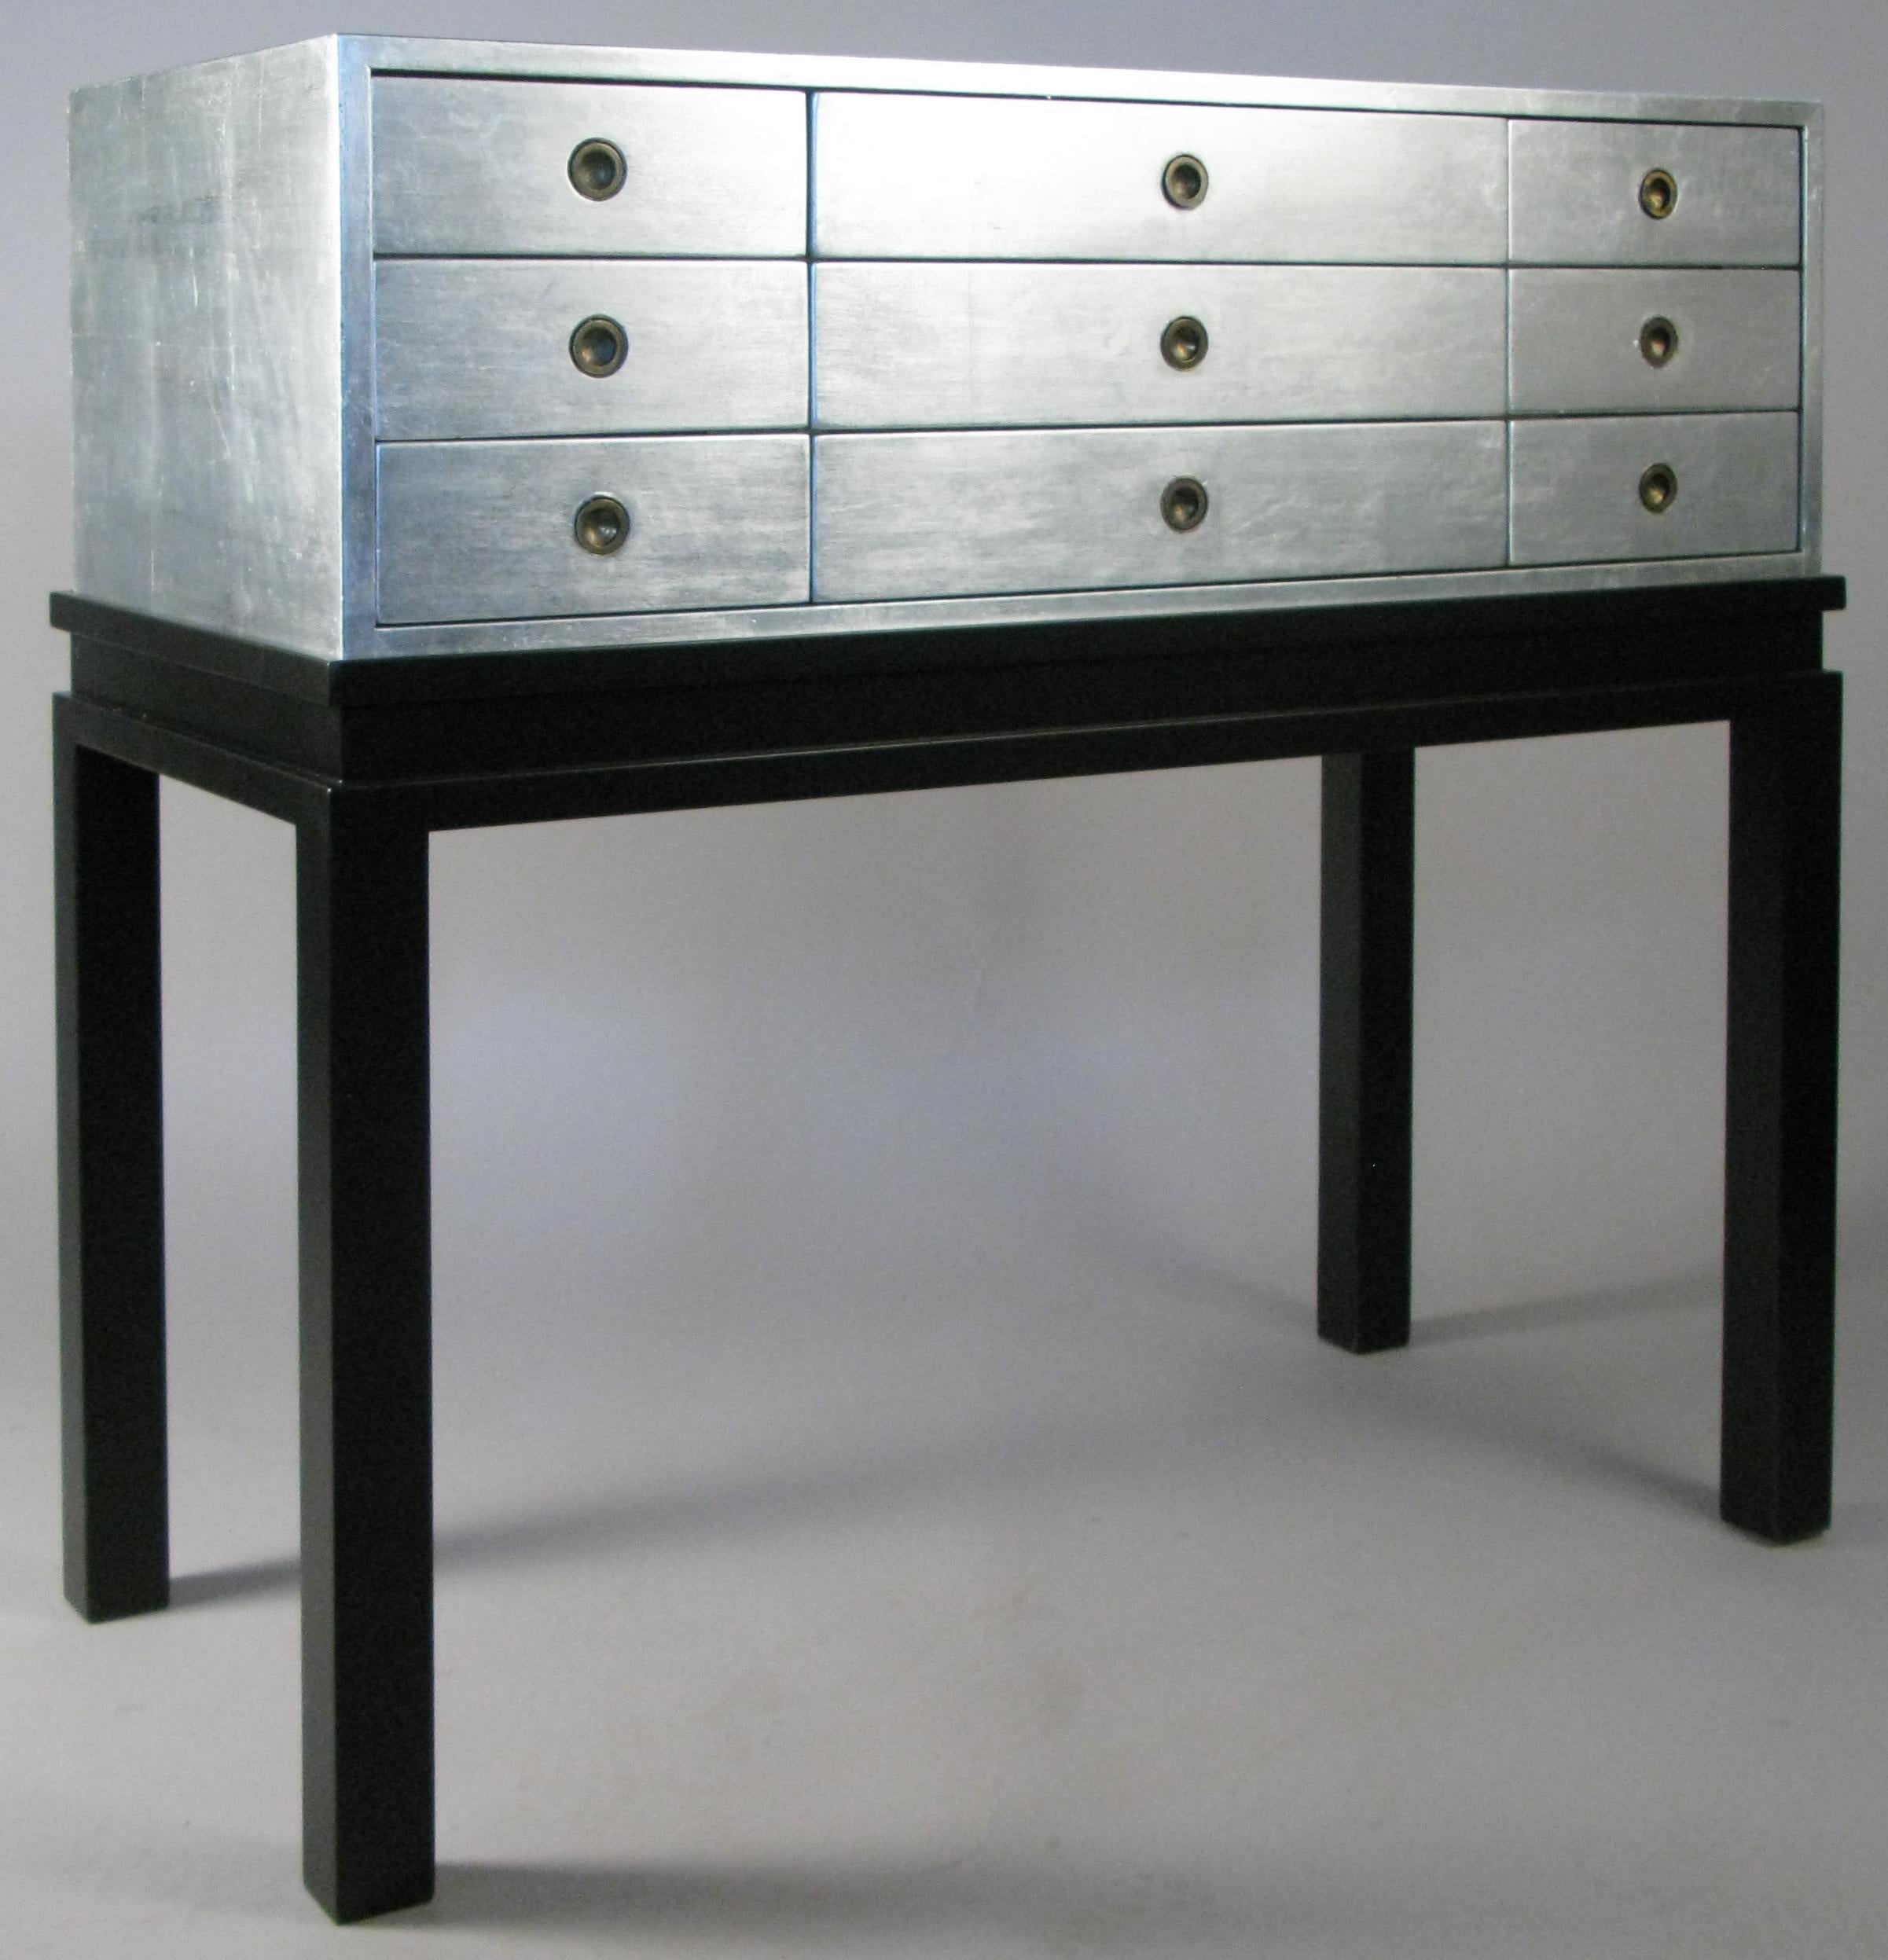 An outstanding vintage 1960s nine-drawer chest by Kittinger. The case fitted with nine drawers with recessed brass ring pulls, finished in beautiful silver leaf. The case rests upon a black lacquered base. Perfect for a wide variety of placements,